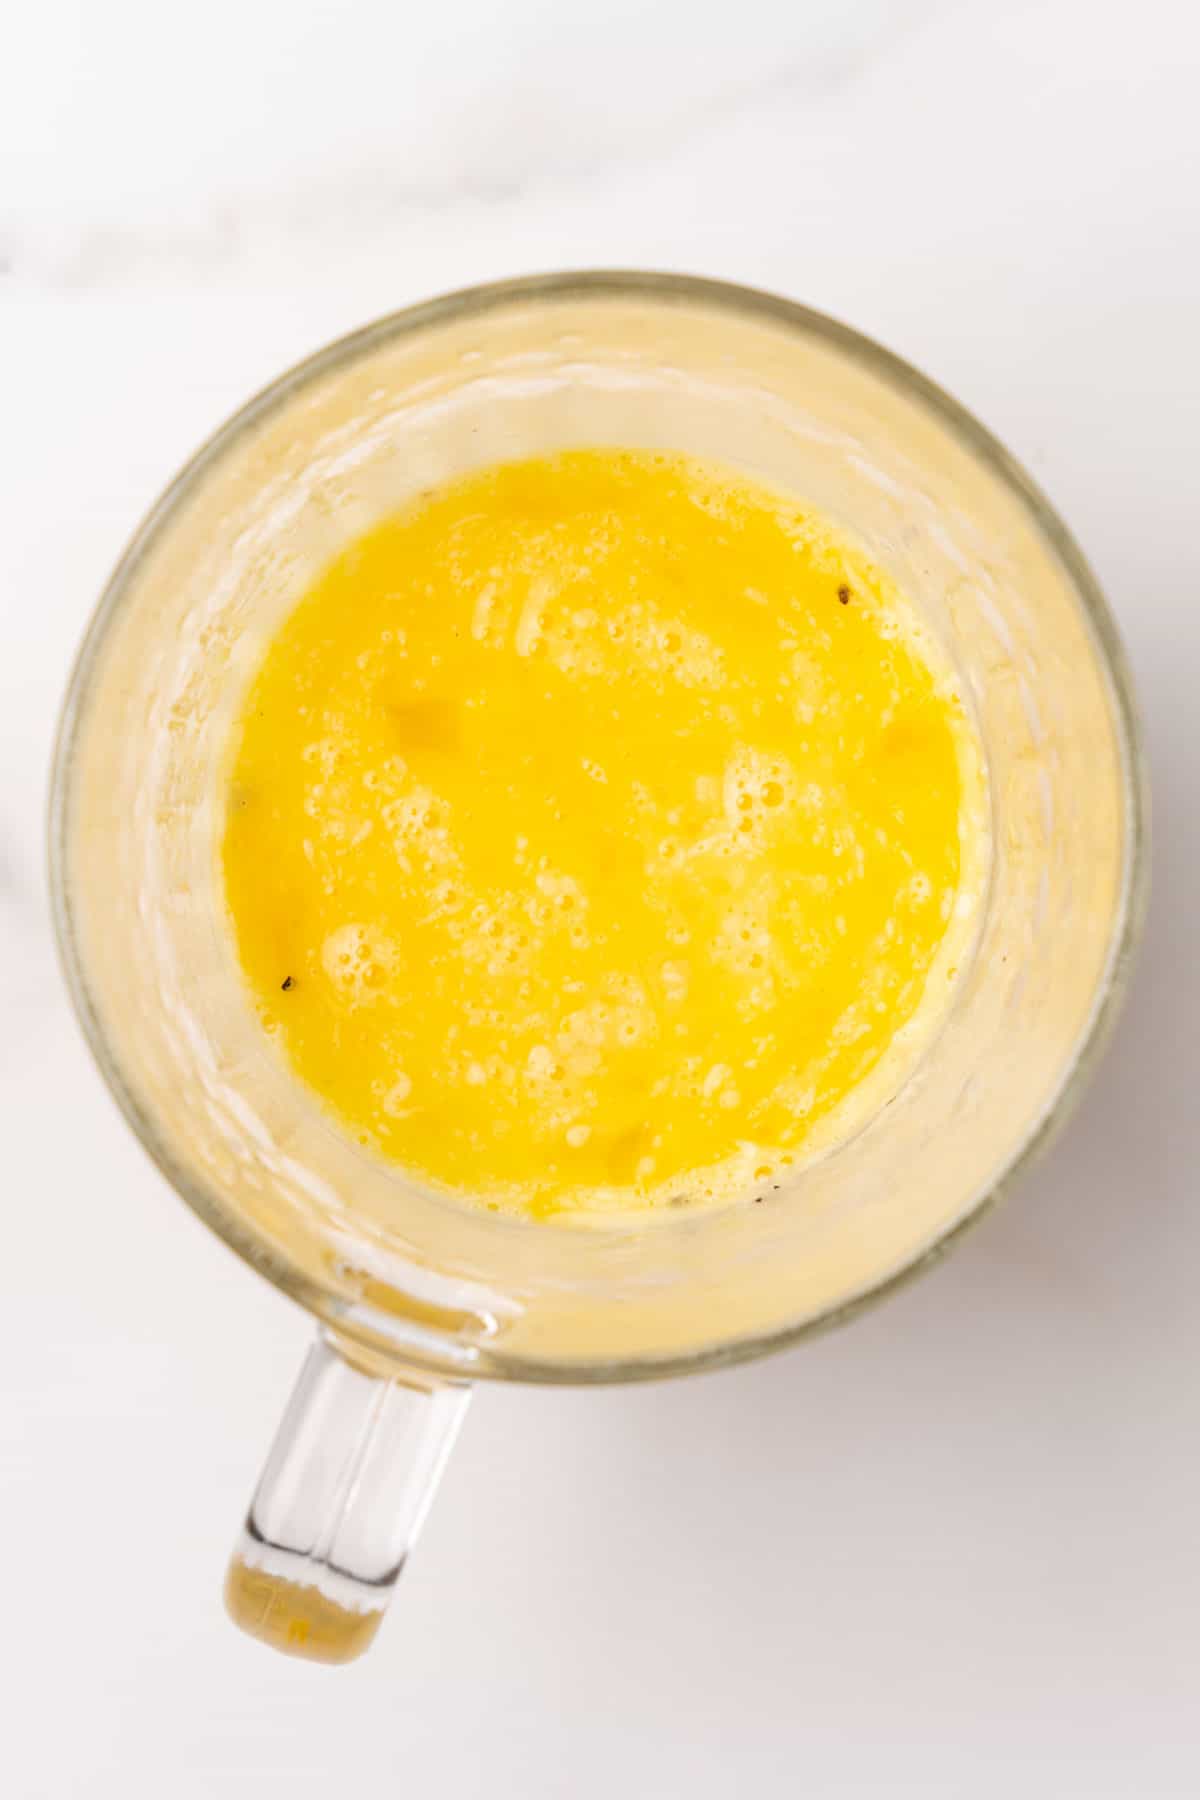 Eggs and seasoning beat together in a glass mug, as seen from above on a white background